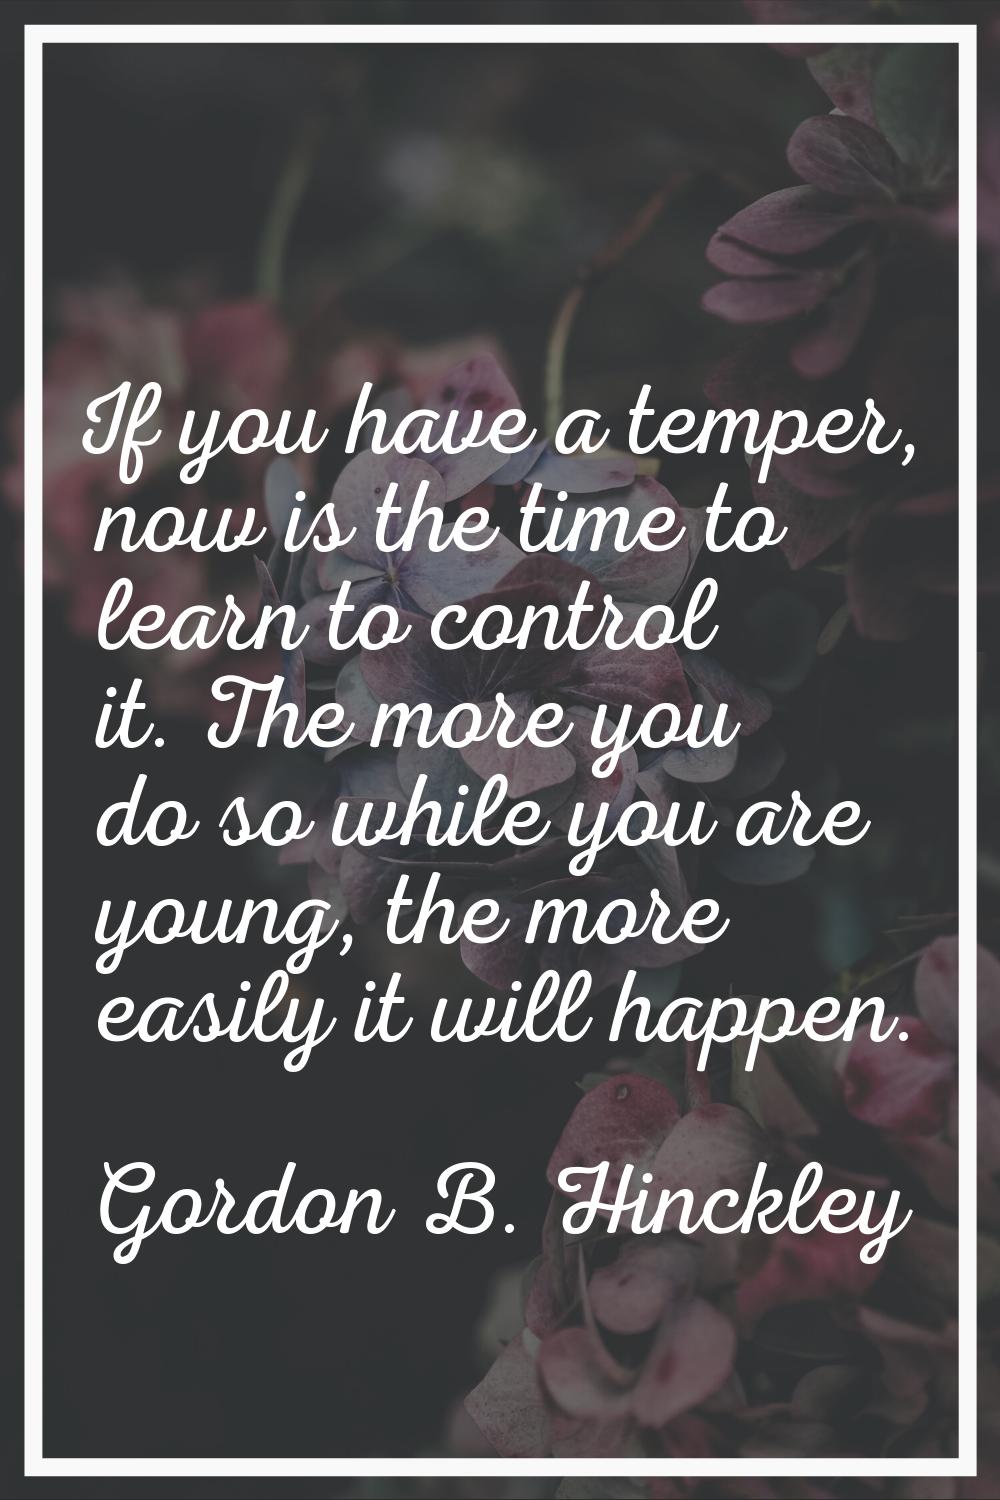 If you have a temper, now is the time to learn to control it. The more you do so while you are youn